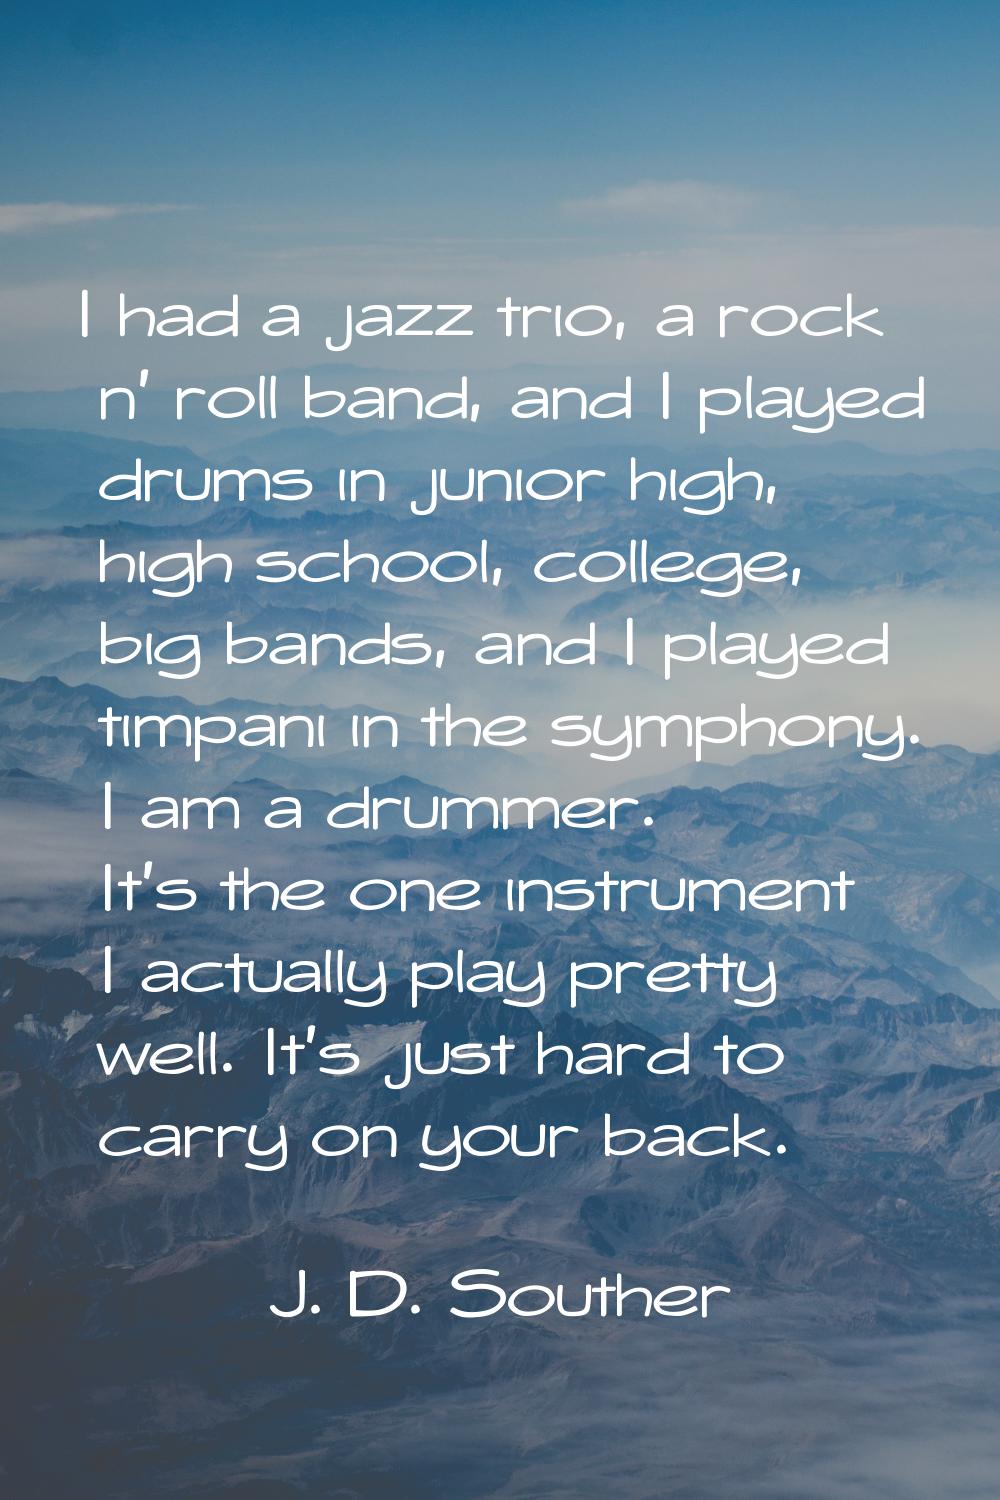 I had a jazz trio, a rock n' roll band, and I played drums in junior high, high school, college, bi